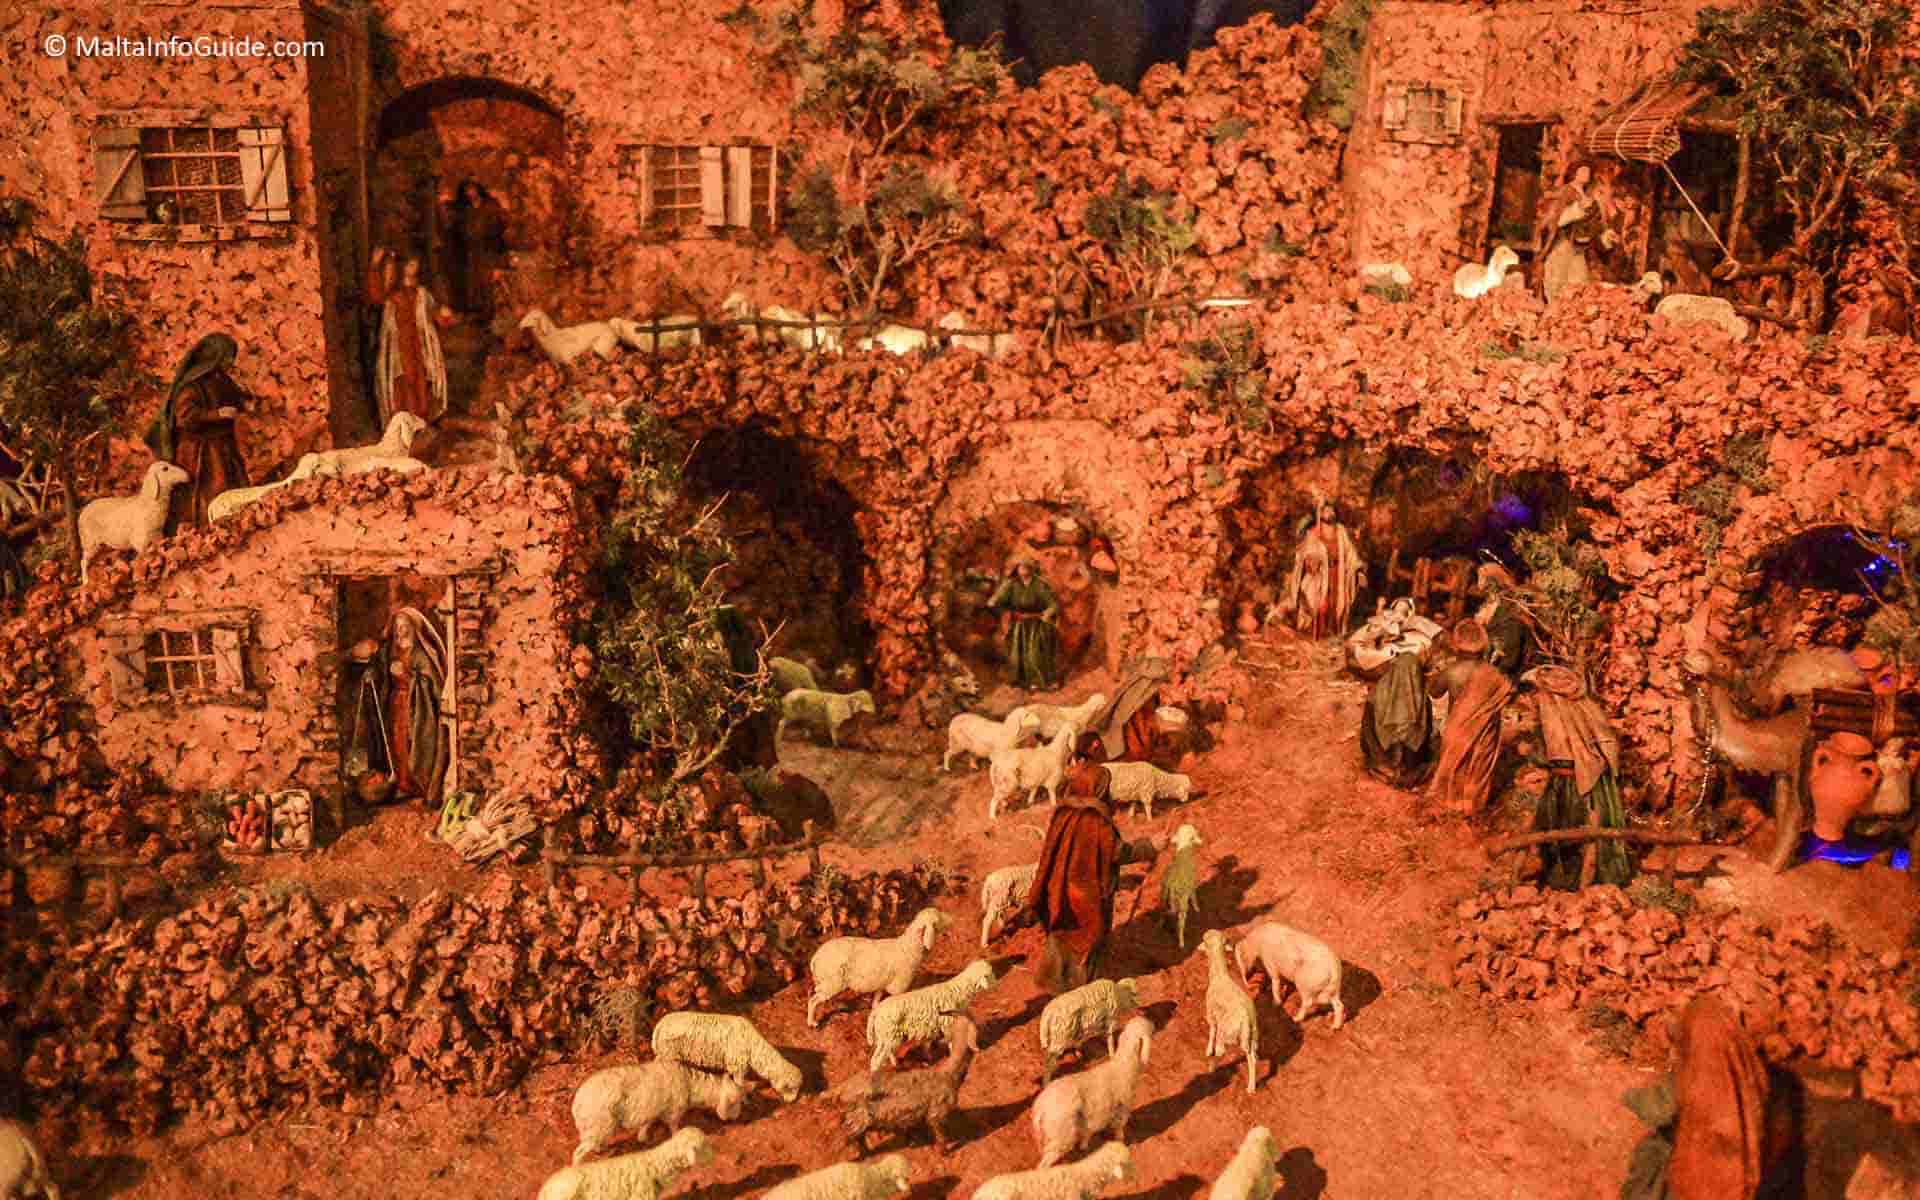 A traditional Maltese crib in an exhibition.